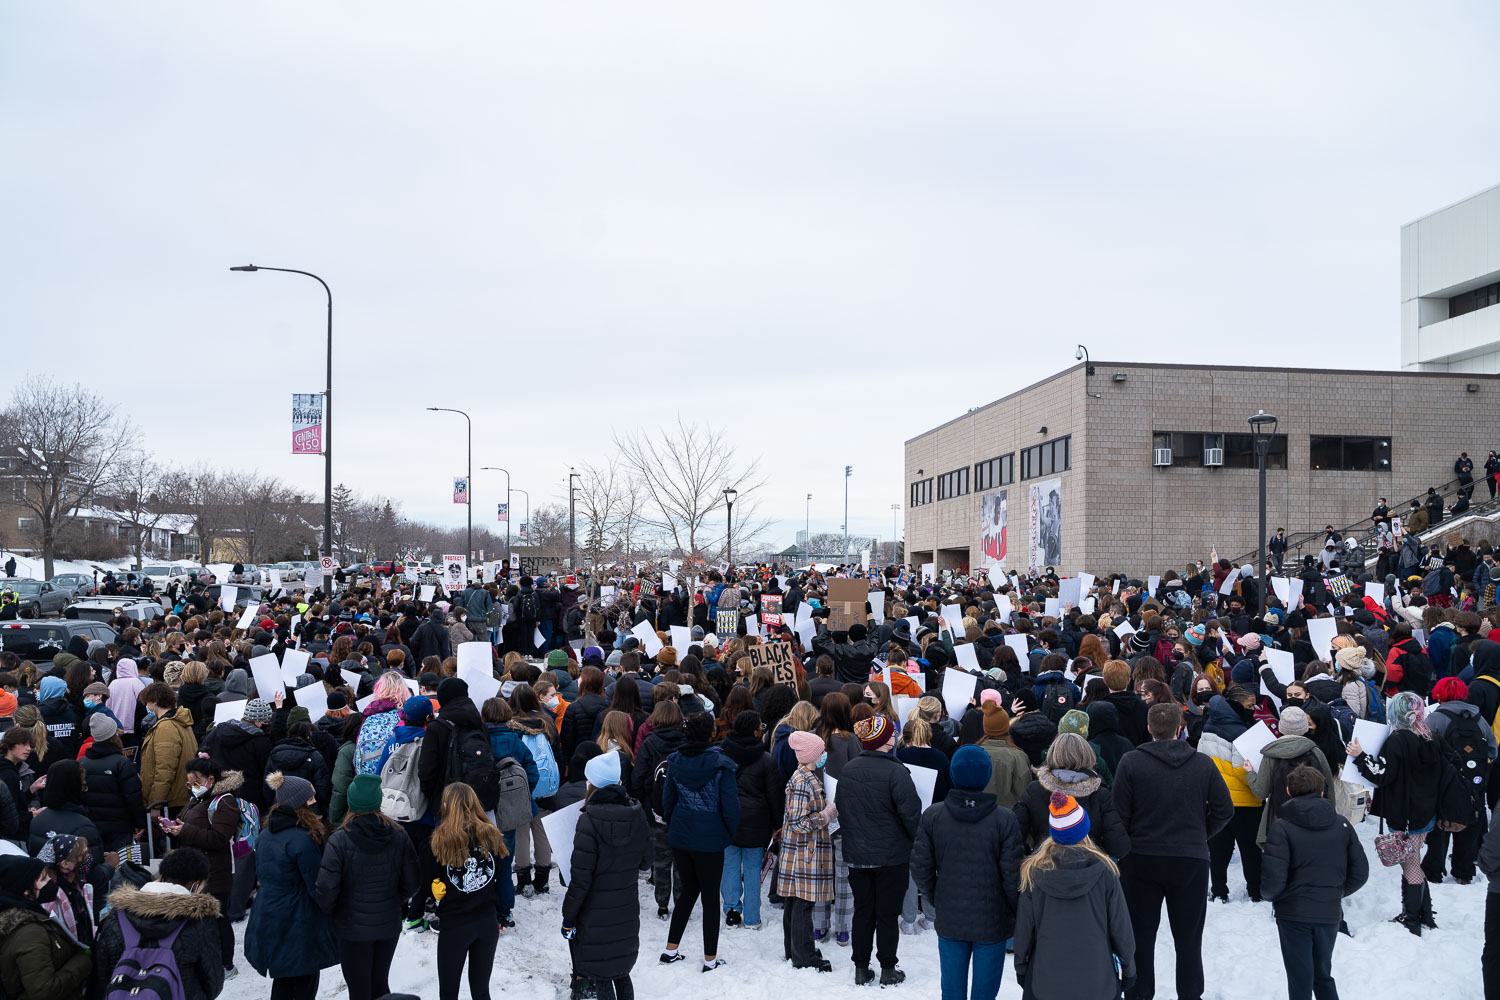 Amir Locke Student Protest and March, St. Paul